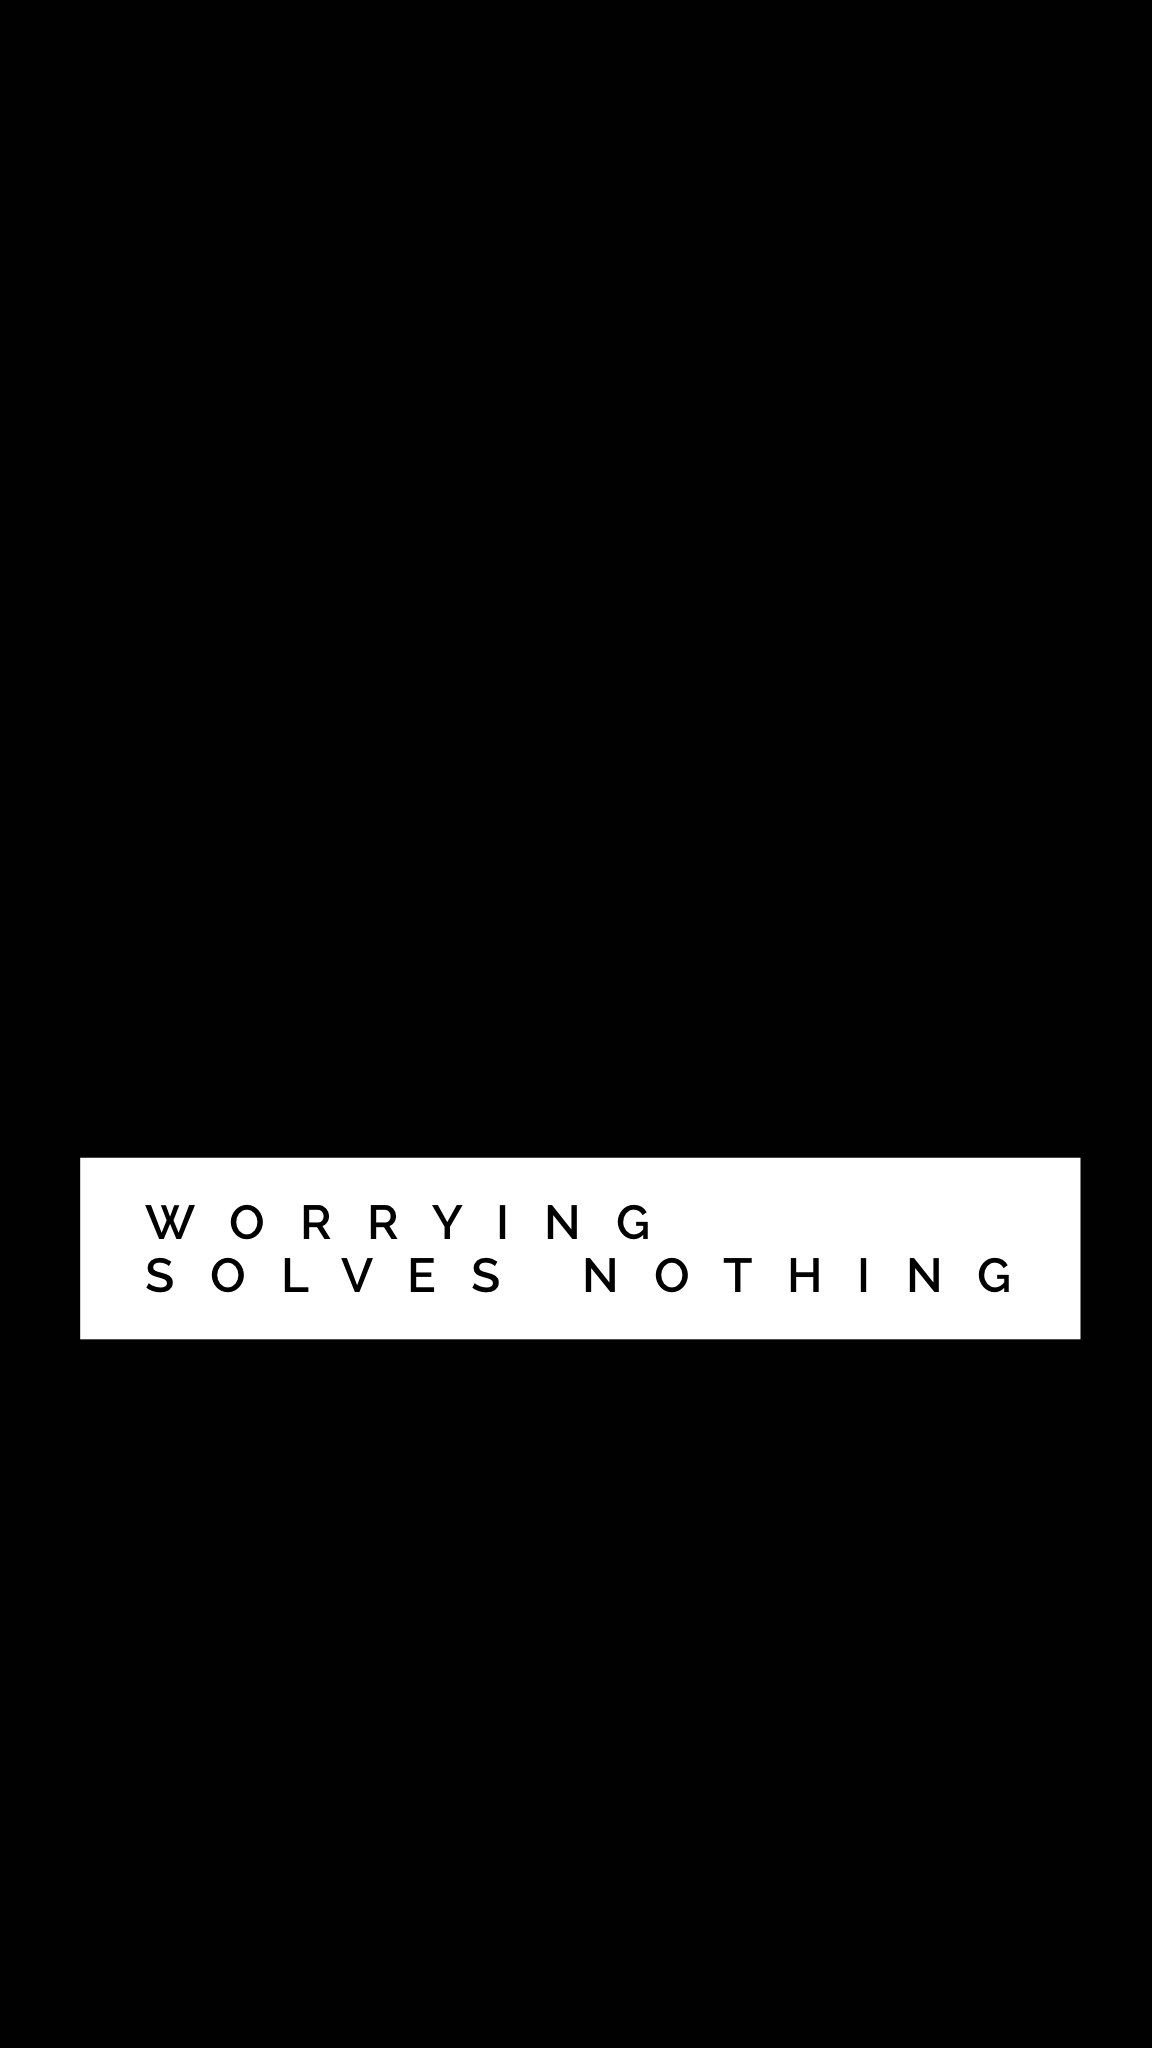 Wallpaper, wall, background, iPhone, Android, minimal, simple, quote, HD, black, white,. Wallpaper quotes, Simple quotes, Quote iphone